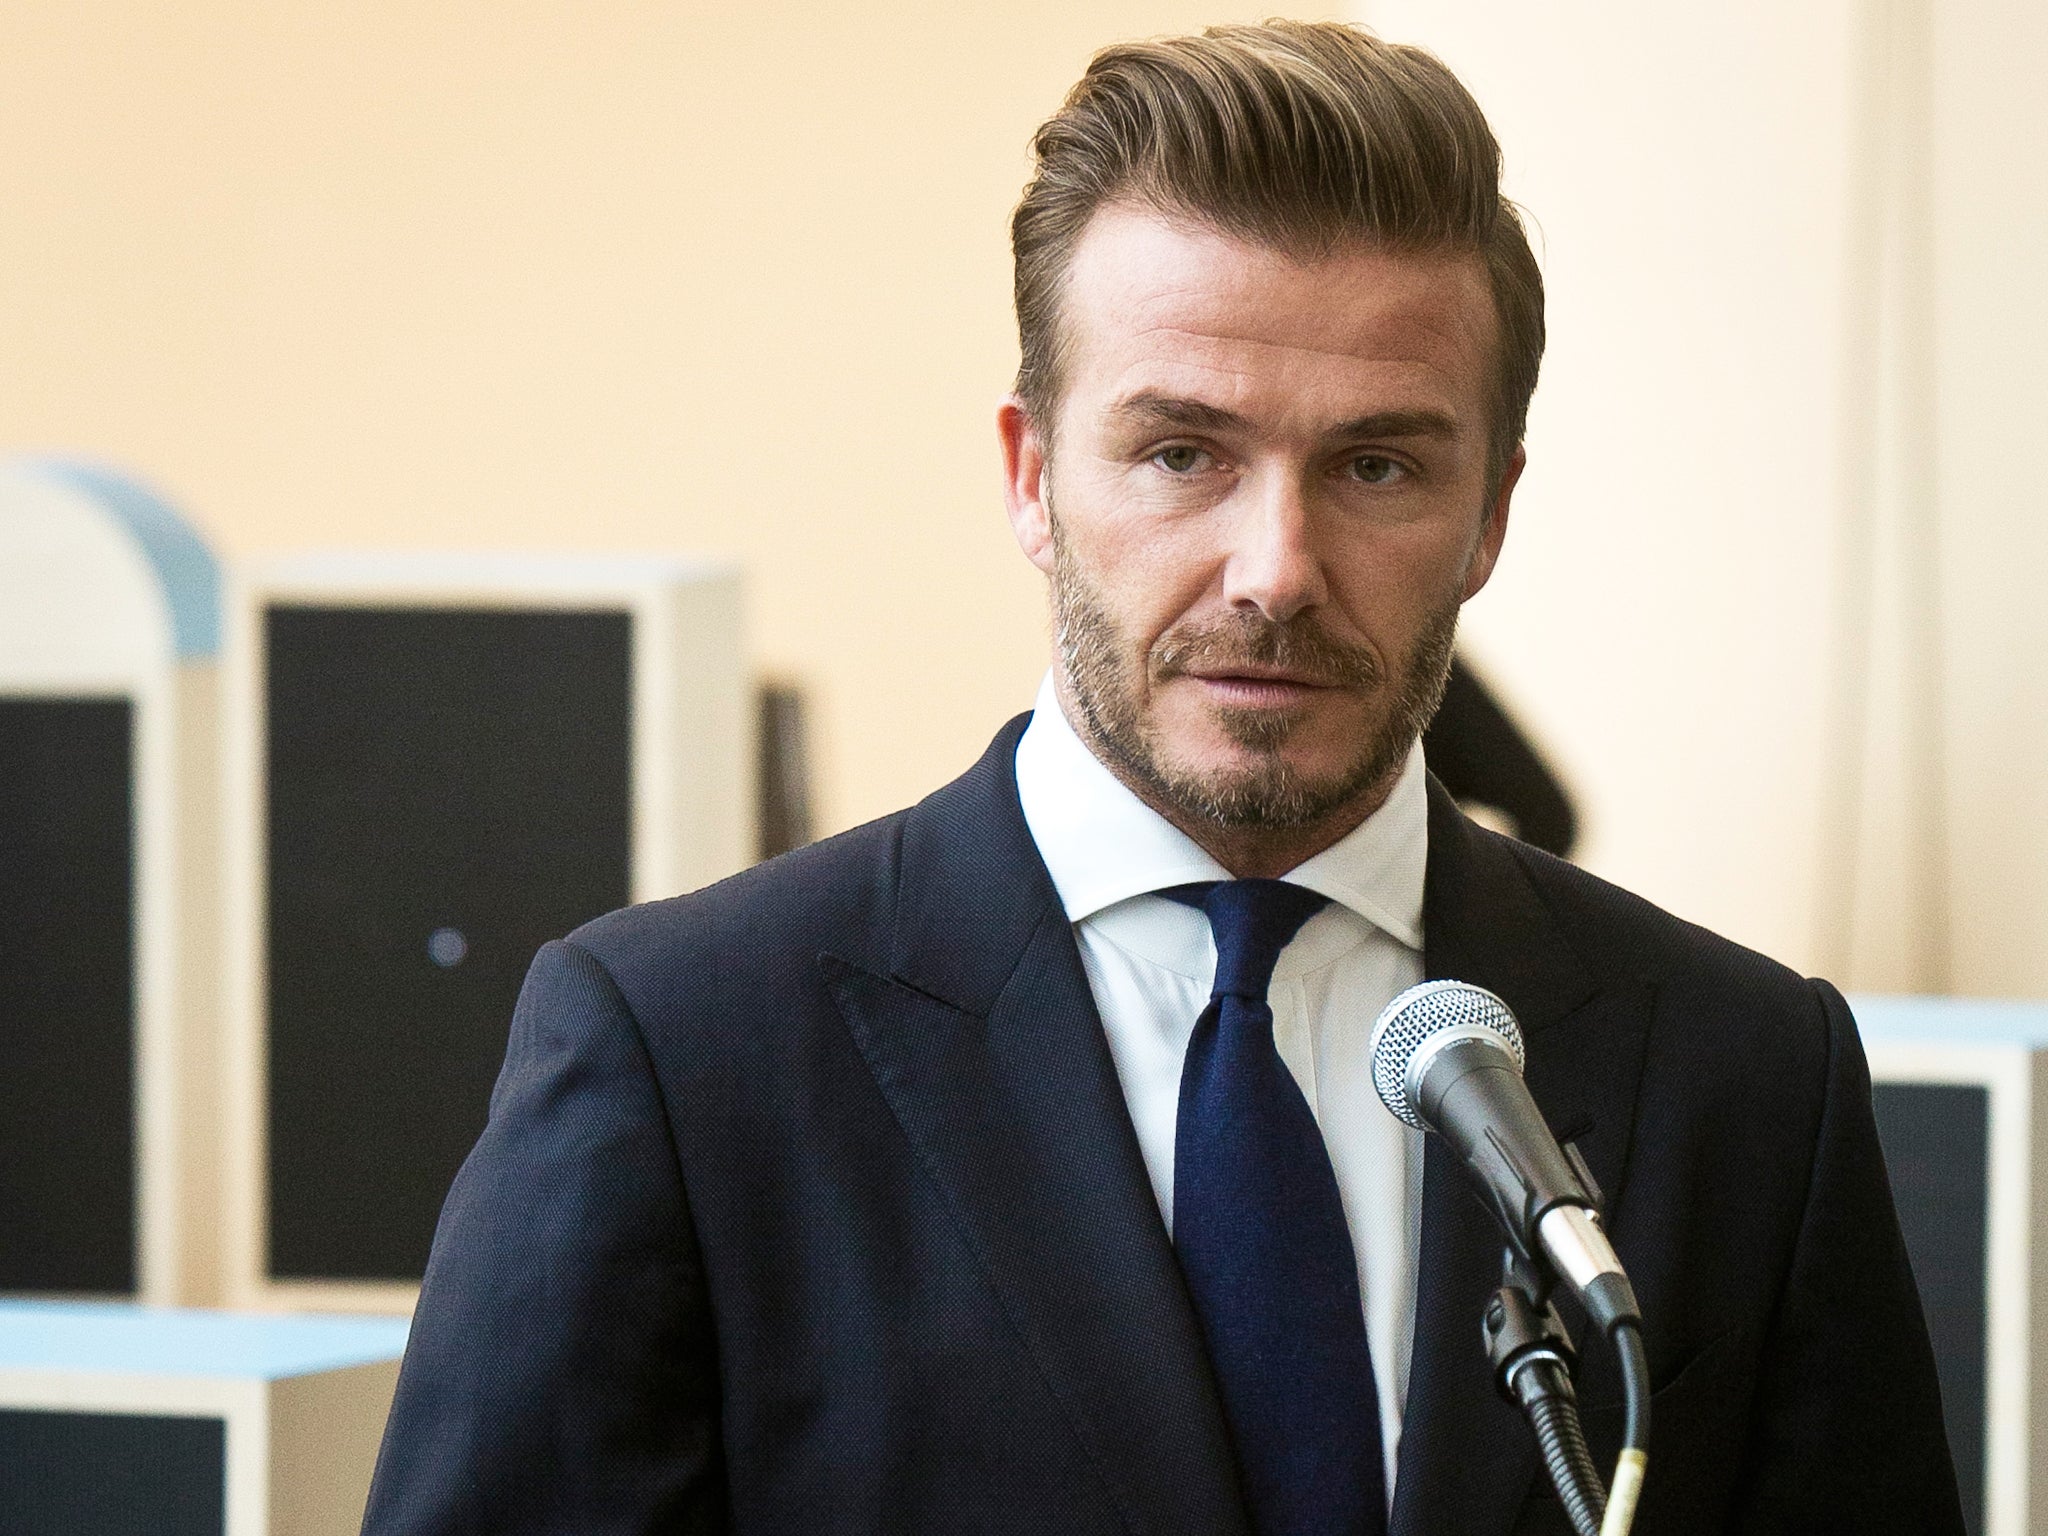 David Beckham visibly emotional while discussing suffering of children ...